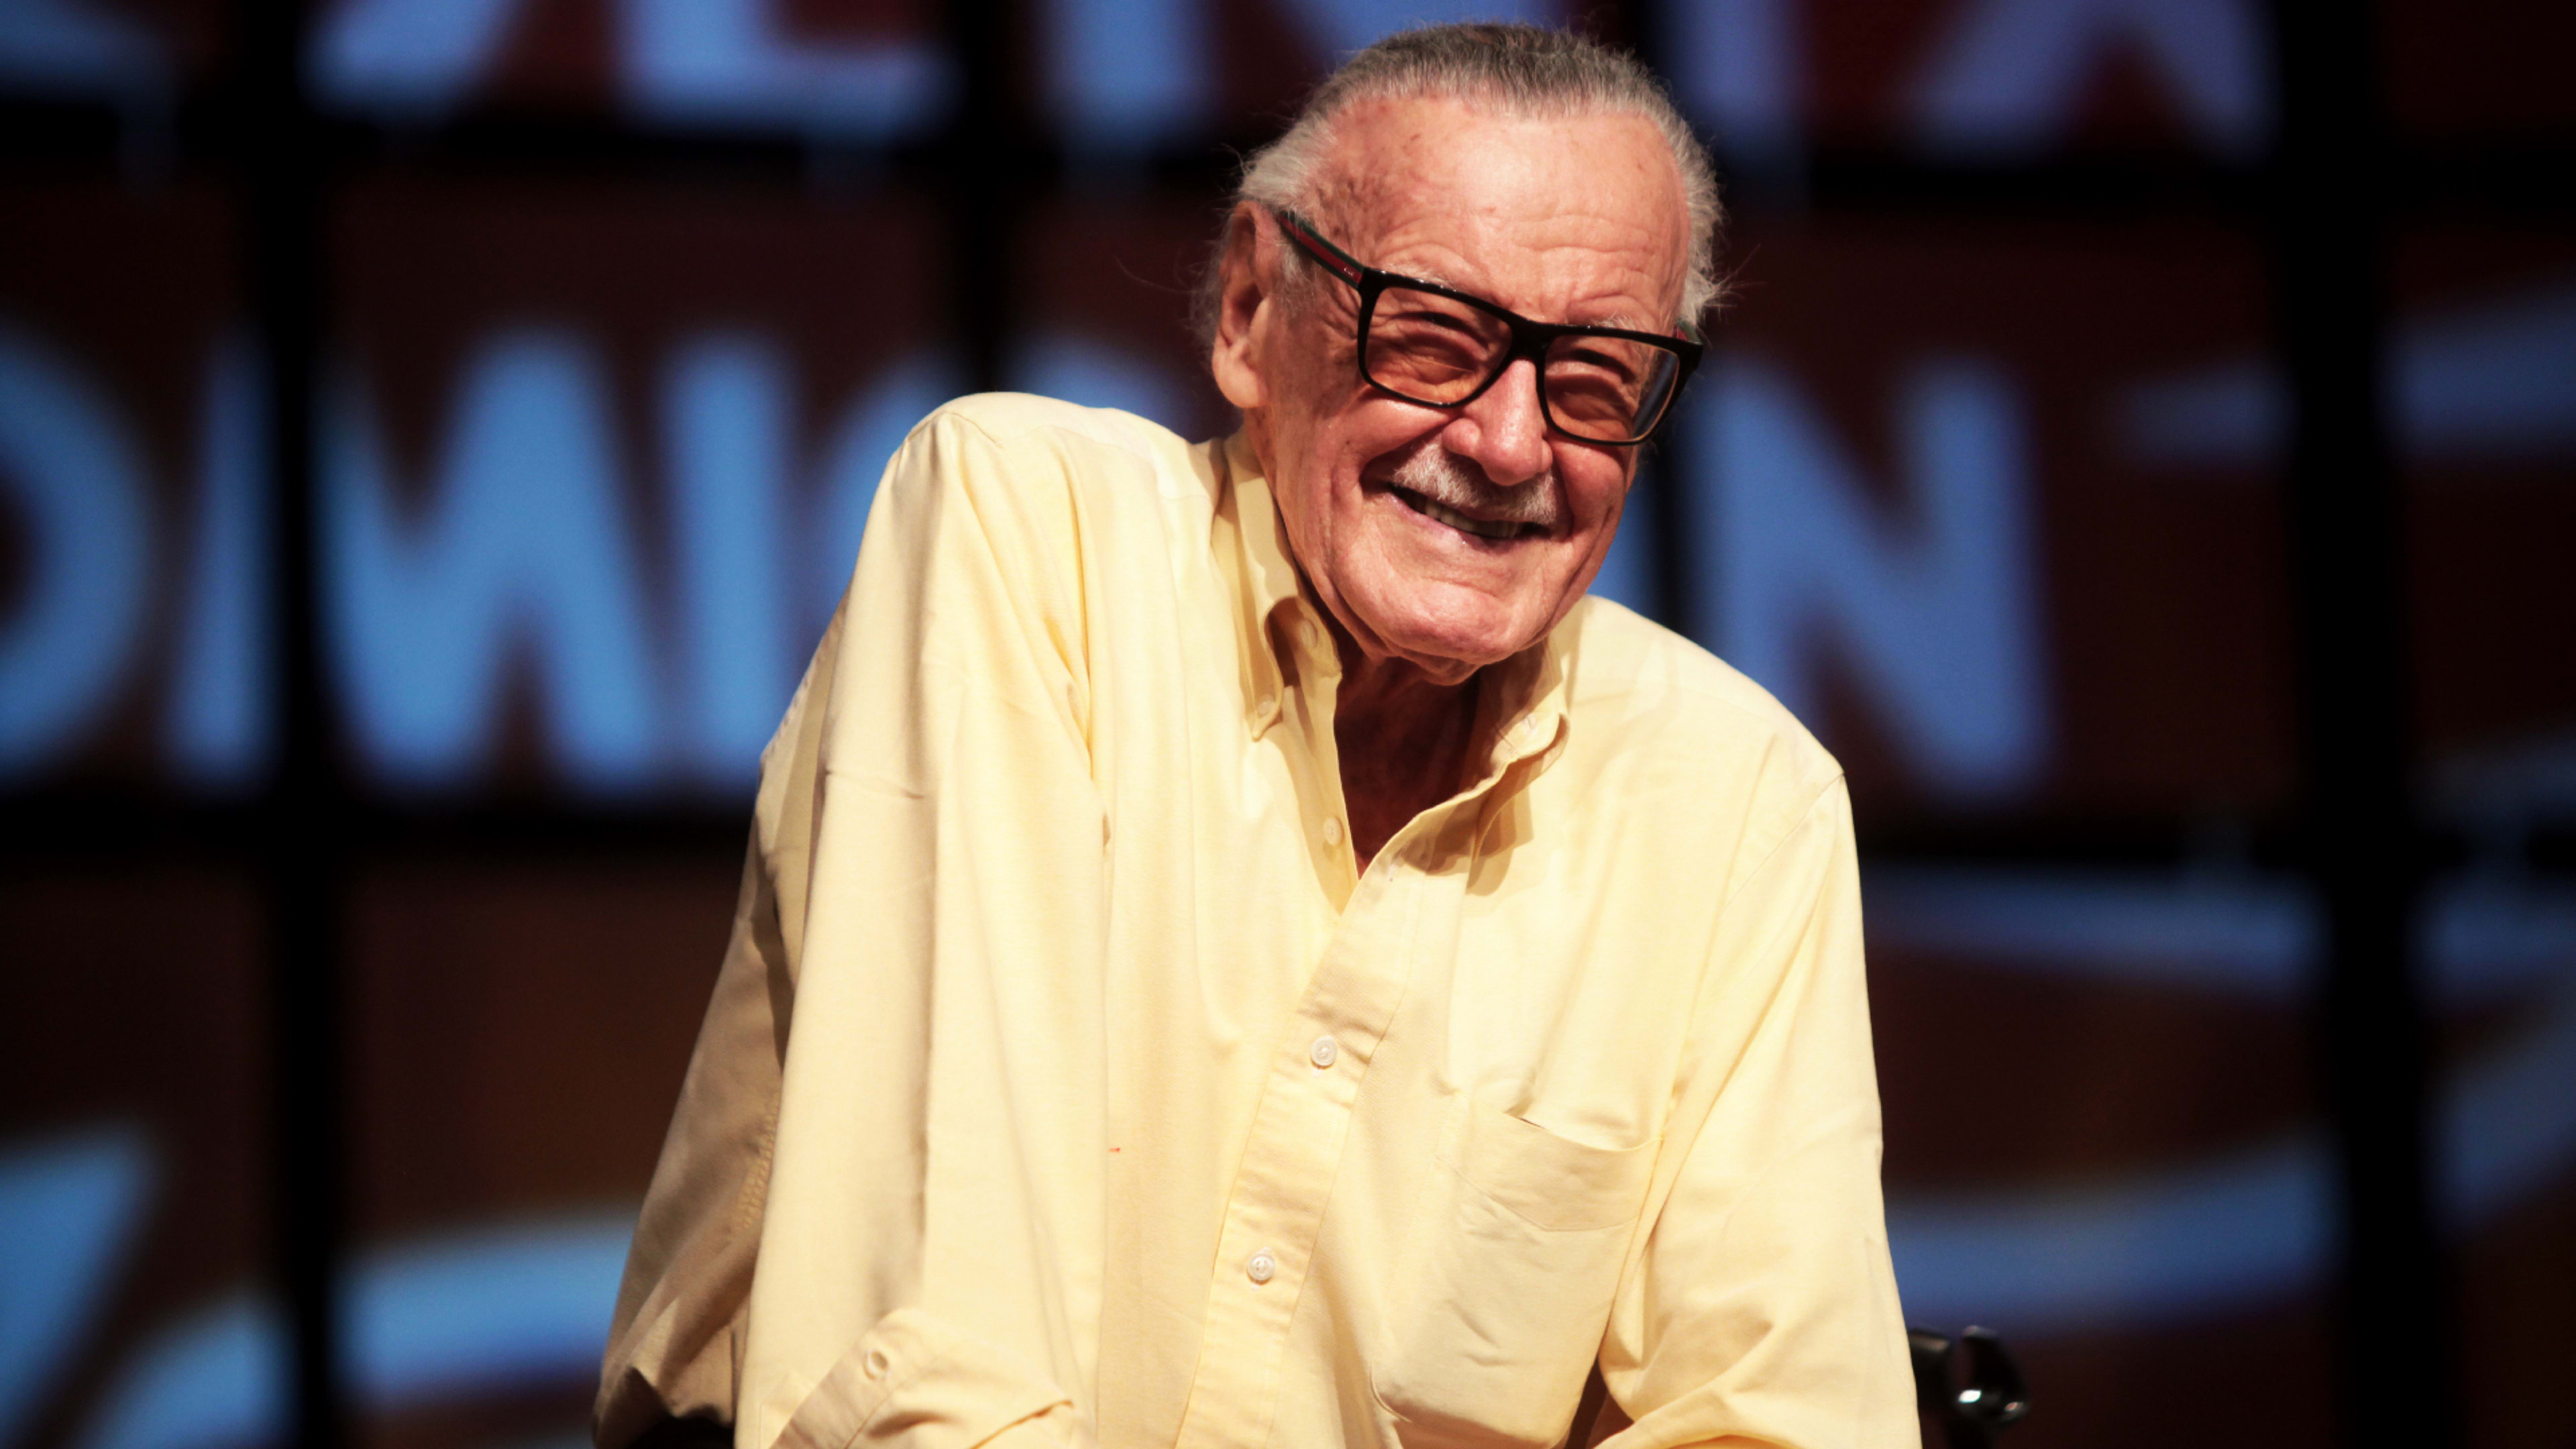 Stan Lee, the arch superhero of comic books, is dead at 95